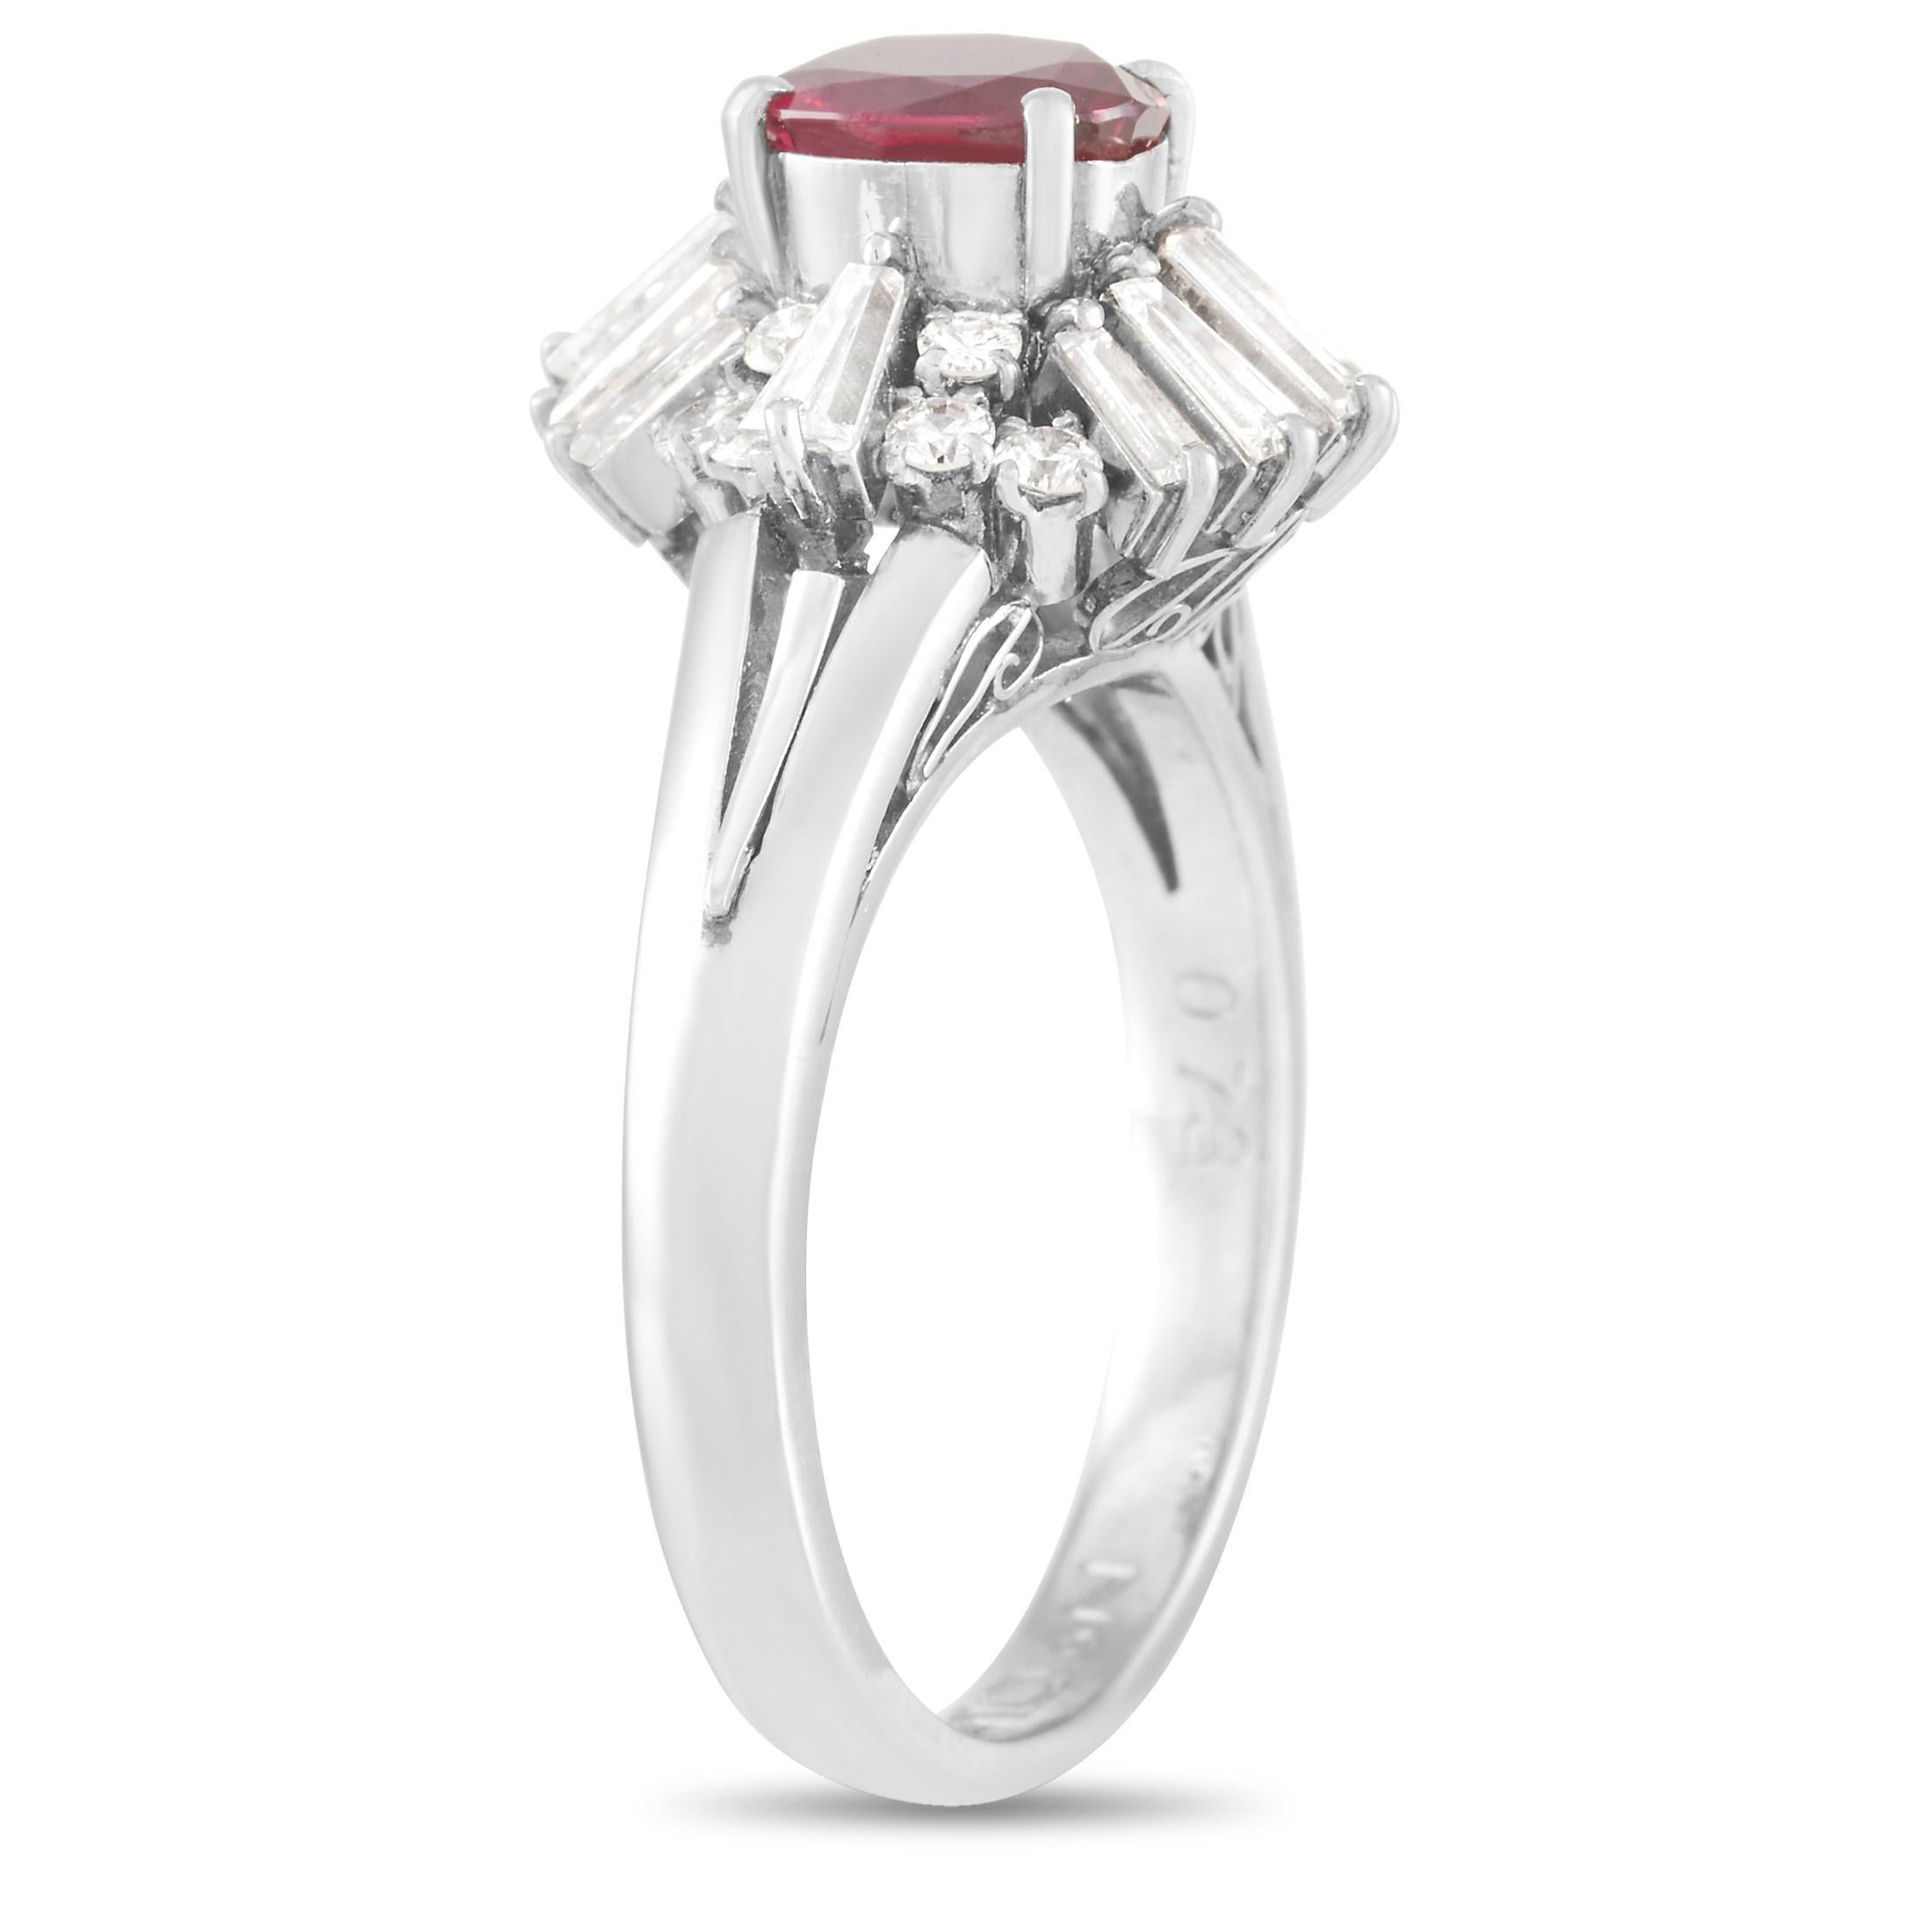 This gorgeous LB Exclusive Platinum 0.73 ct Diamond 0.80 ct Ruby Ring is a stunning addition to any jewelry collection. The band is made with platinum and set with a halo of emerald and round cut diamonds totaling 0.73 carats and surrounding a